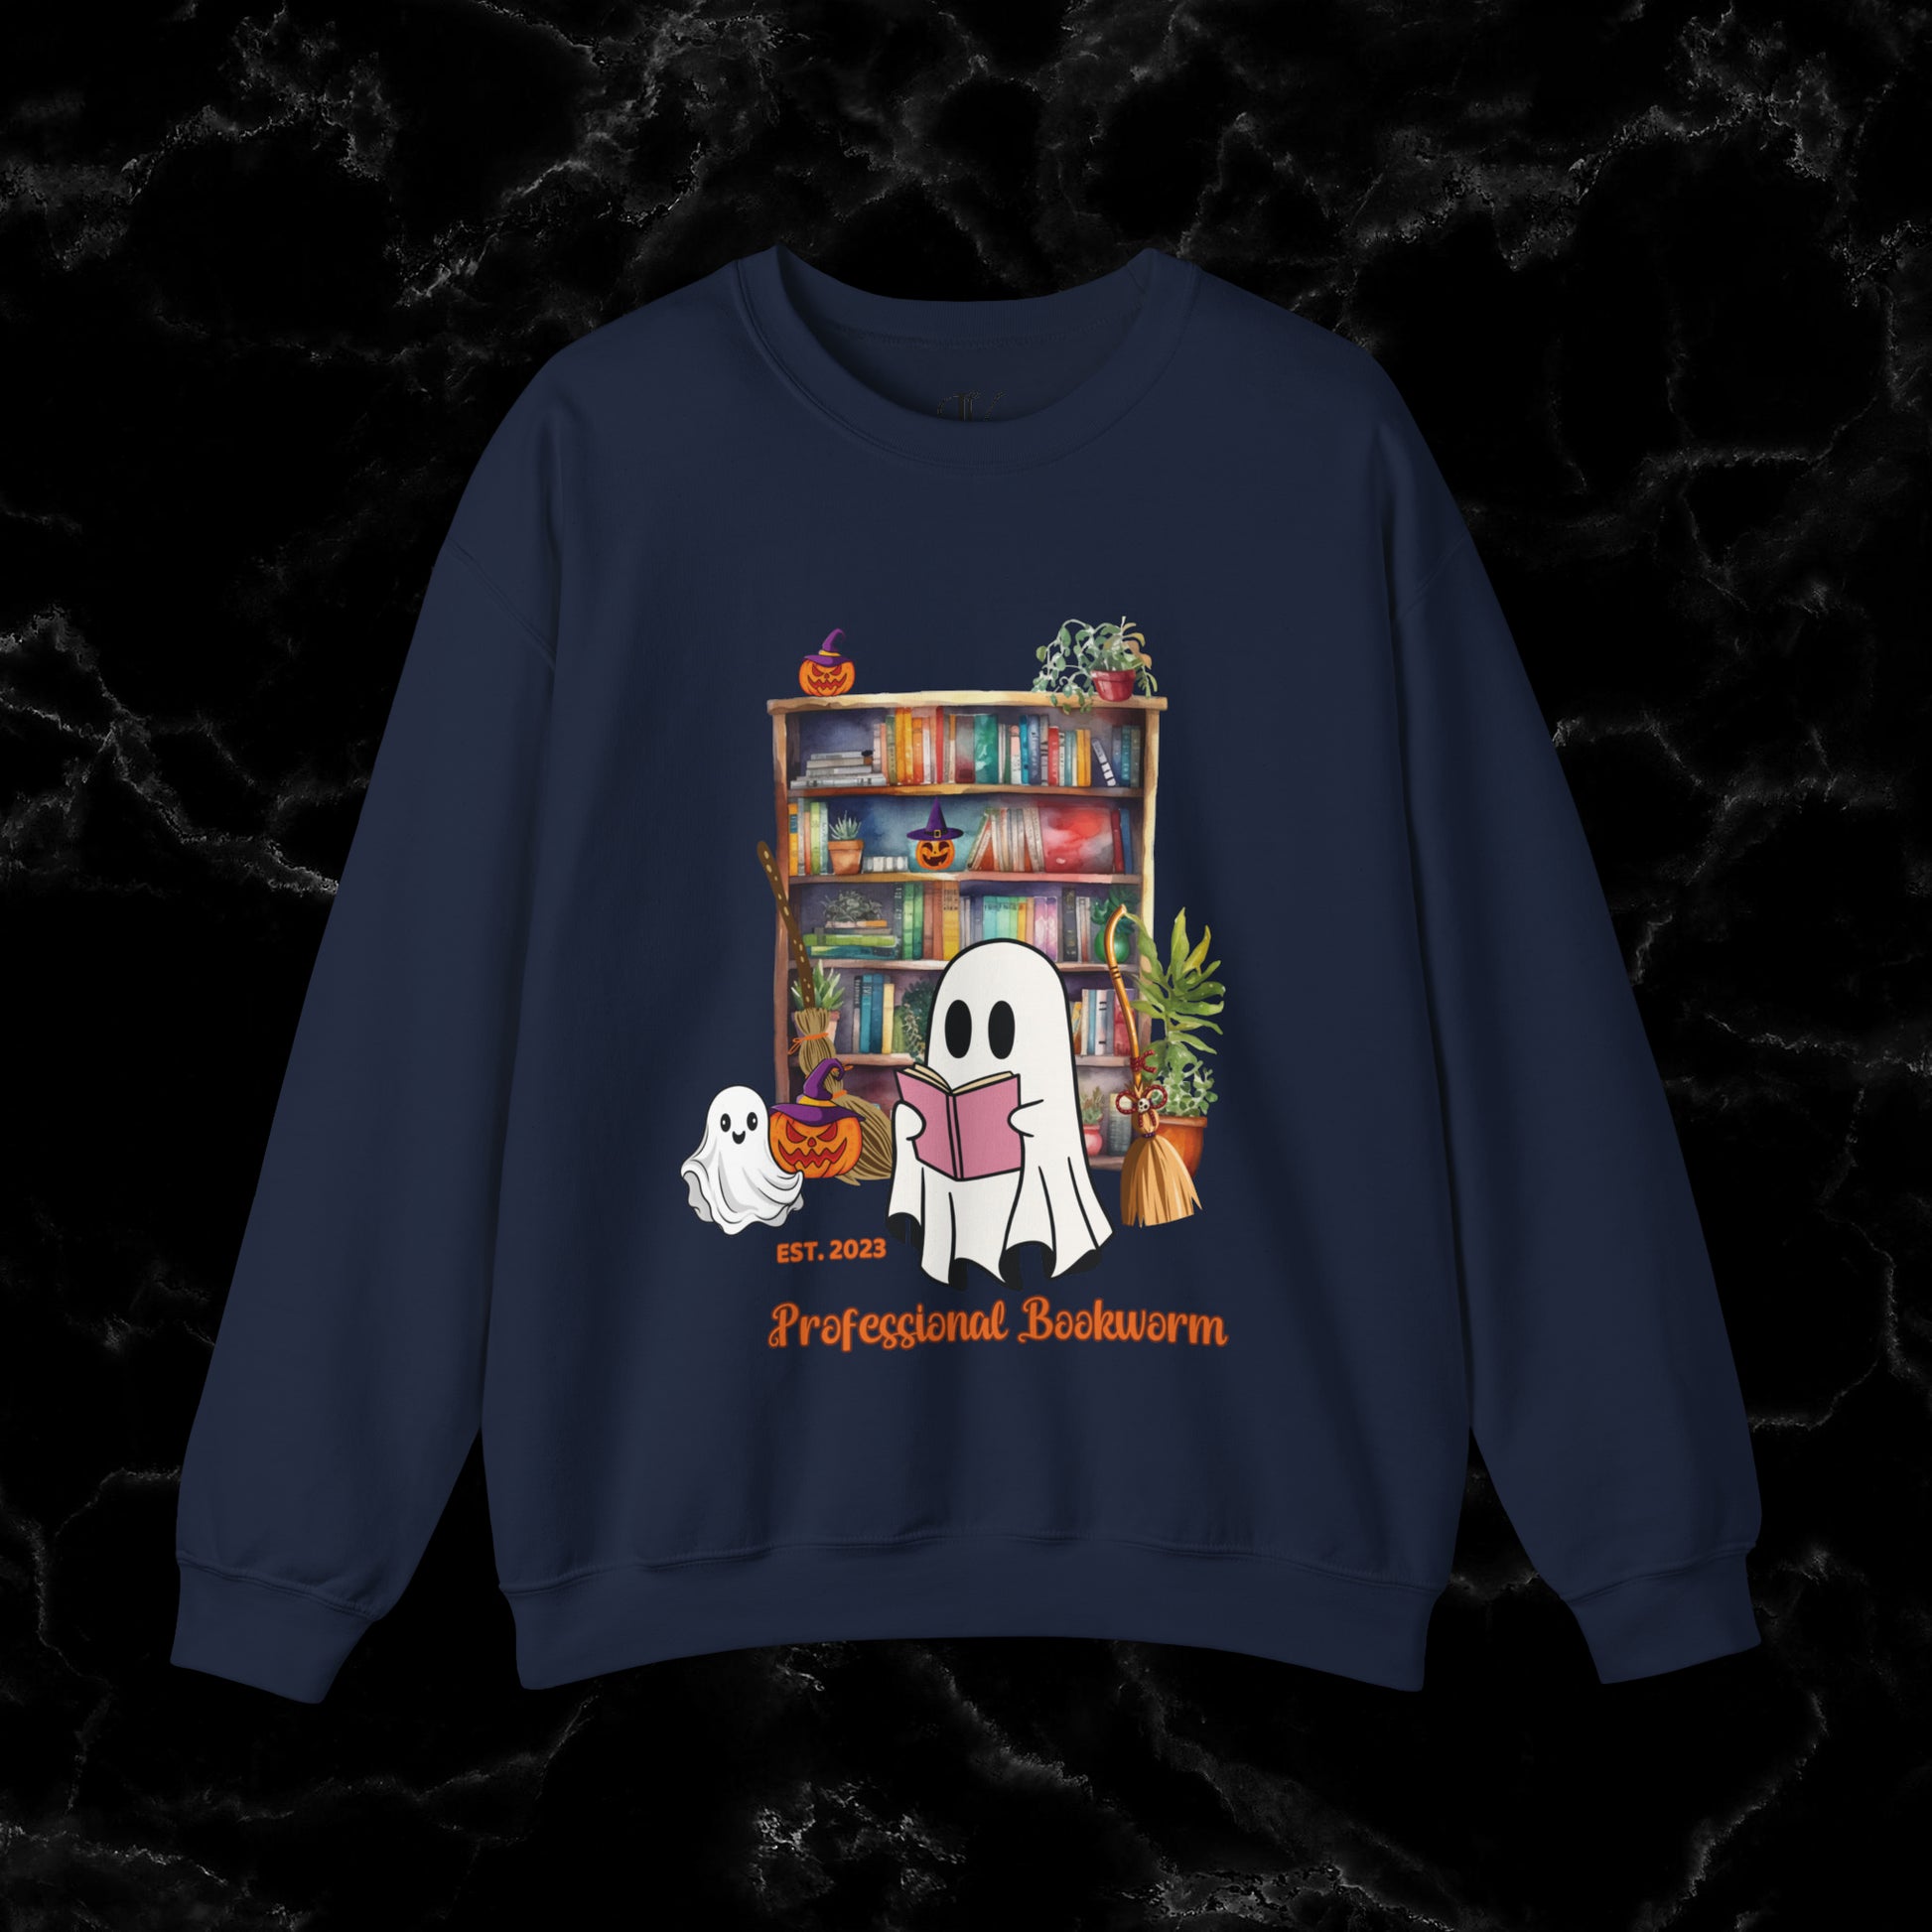 Witchy Gifts for Book Lover Cottagecore Pumpkin Witch Sweatshirt - Bookworm Back To School Reading Fall Sweater, Perfect Present for Bookworm Aunt's Birthday Sweatshirt S Navy 